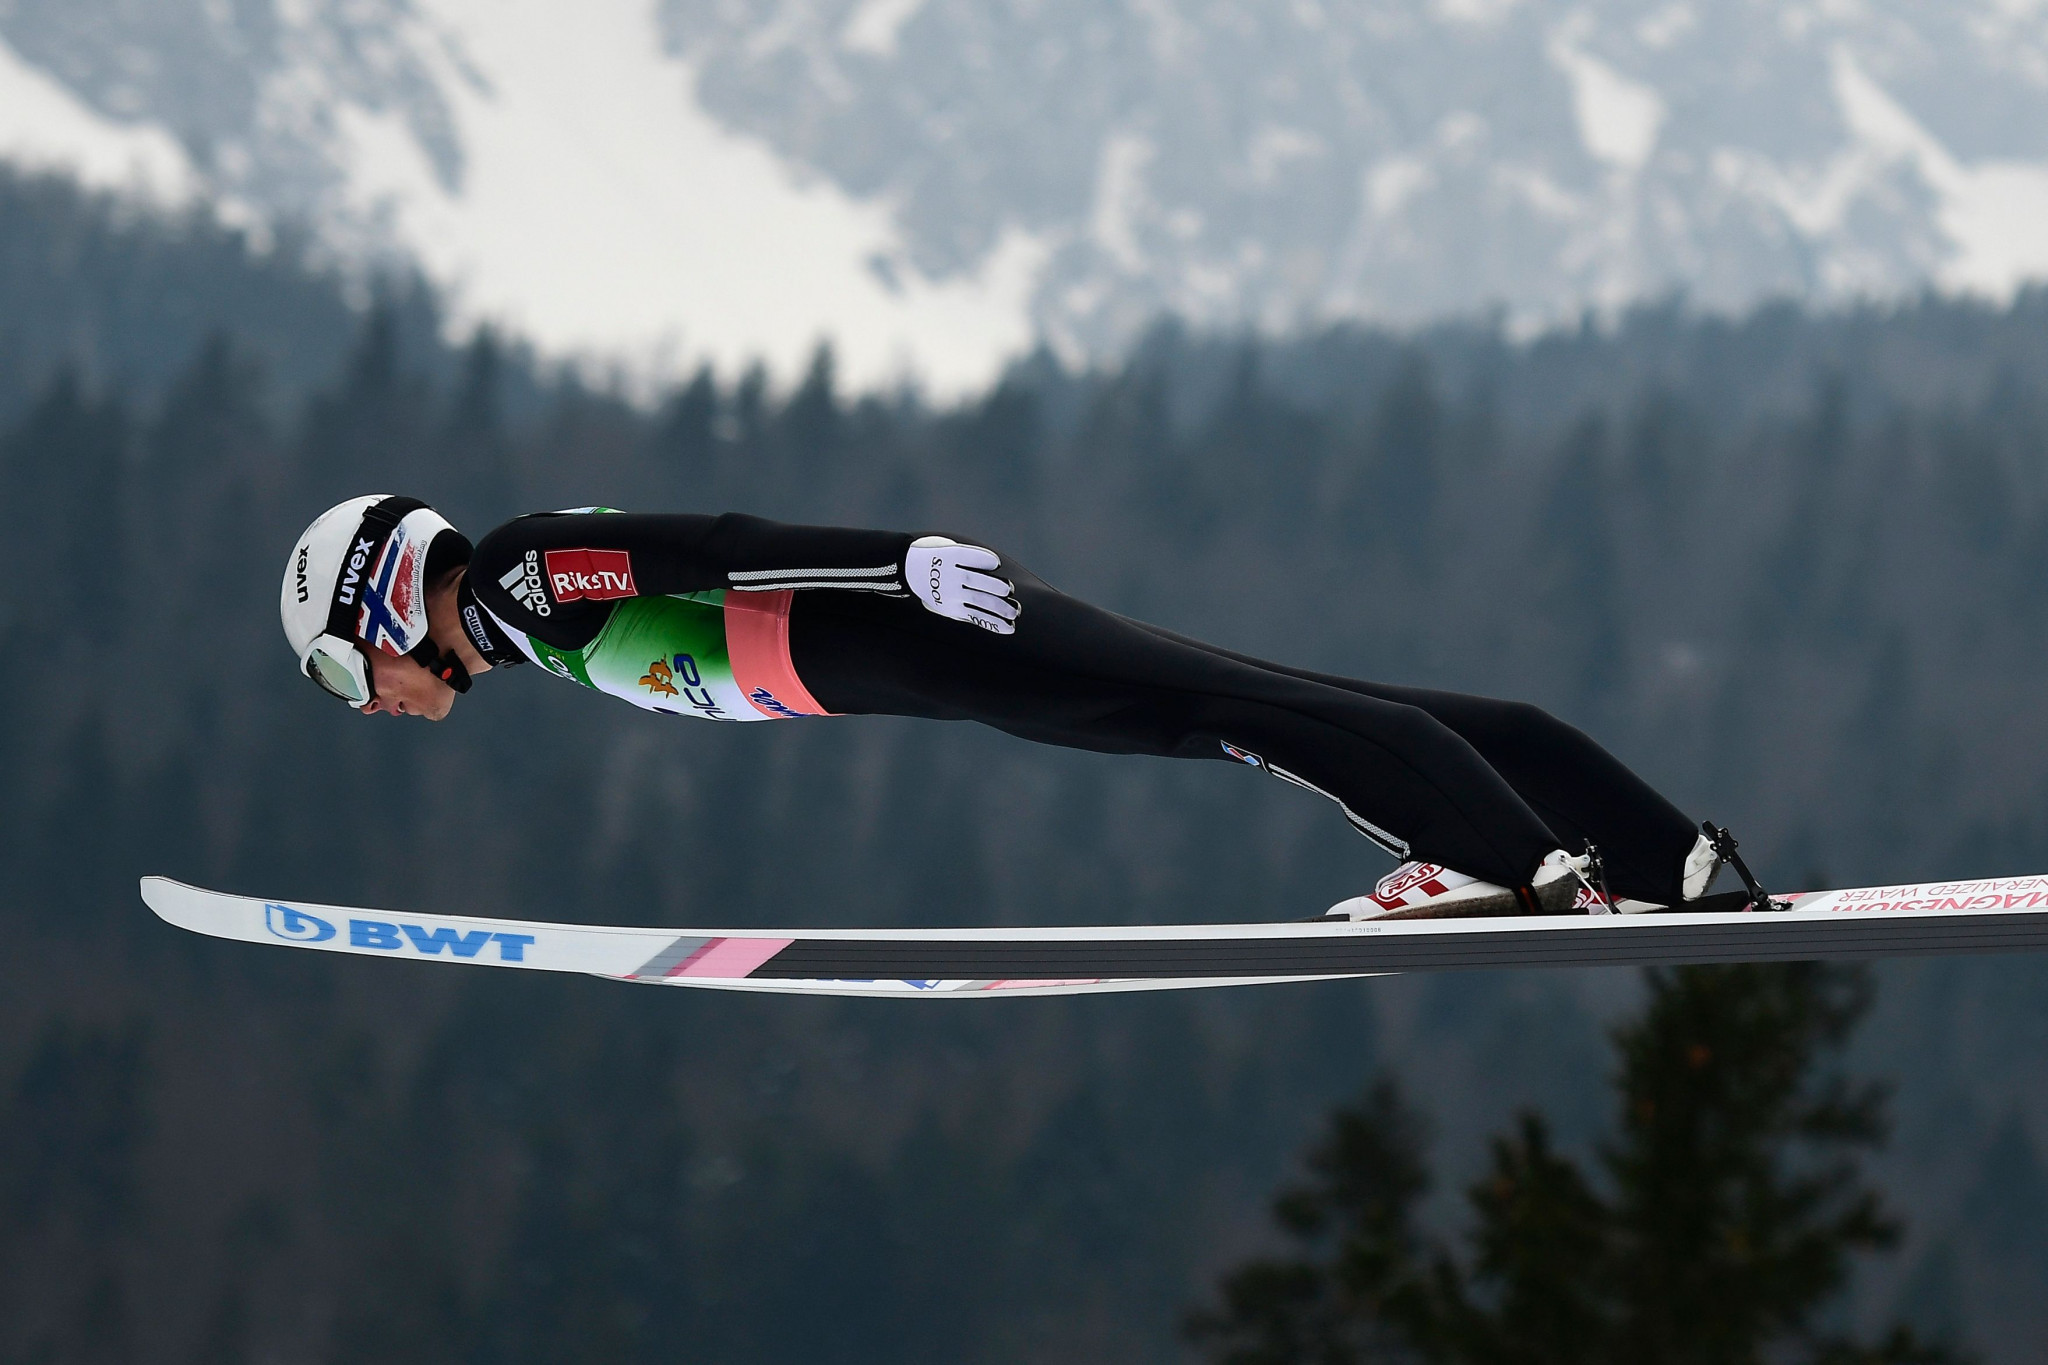 Johann Andre Forfang of Norway won his first FIS Ski Jumping World Cup event in Nizhny Tagil ©Getty Images